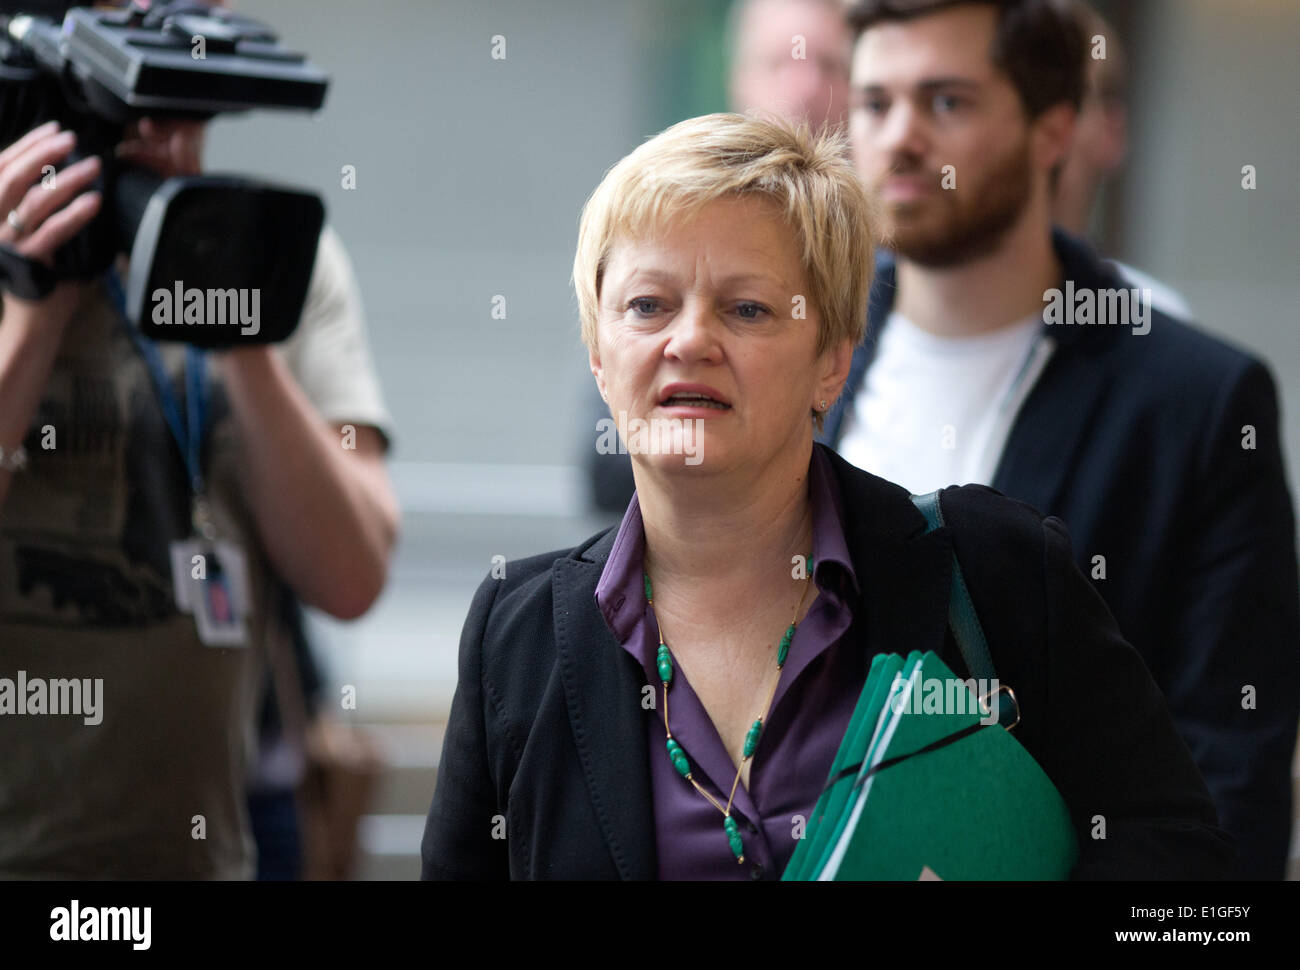 Berlin, Germany. 04th June, 2014. Chairwoman of the Legal Committee Renate Kuenast arrives for the media before the Legal Committee meeting of the German Bundestag parliament in Berlin, Germany, 04 June 2014. The closed meeting focuses on investigations into the NSA affair. The office of the German attorney general has been examining allegations against the US intelligence agency NSA and other foreign intelligence services for months. Photo: KAY NIETFELD/dpa/Alamy Live News Stock Photo